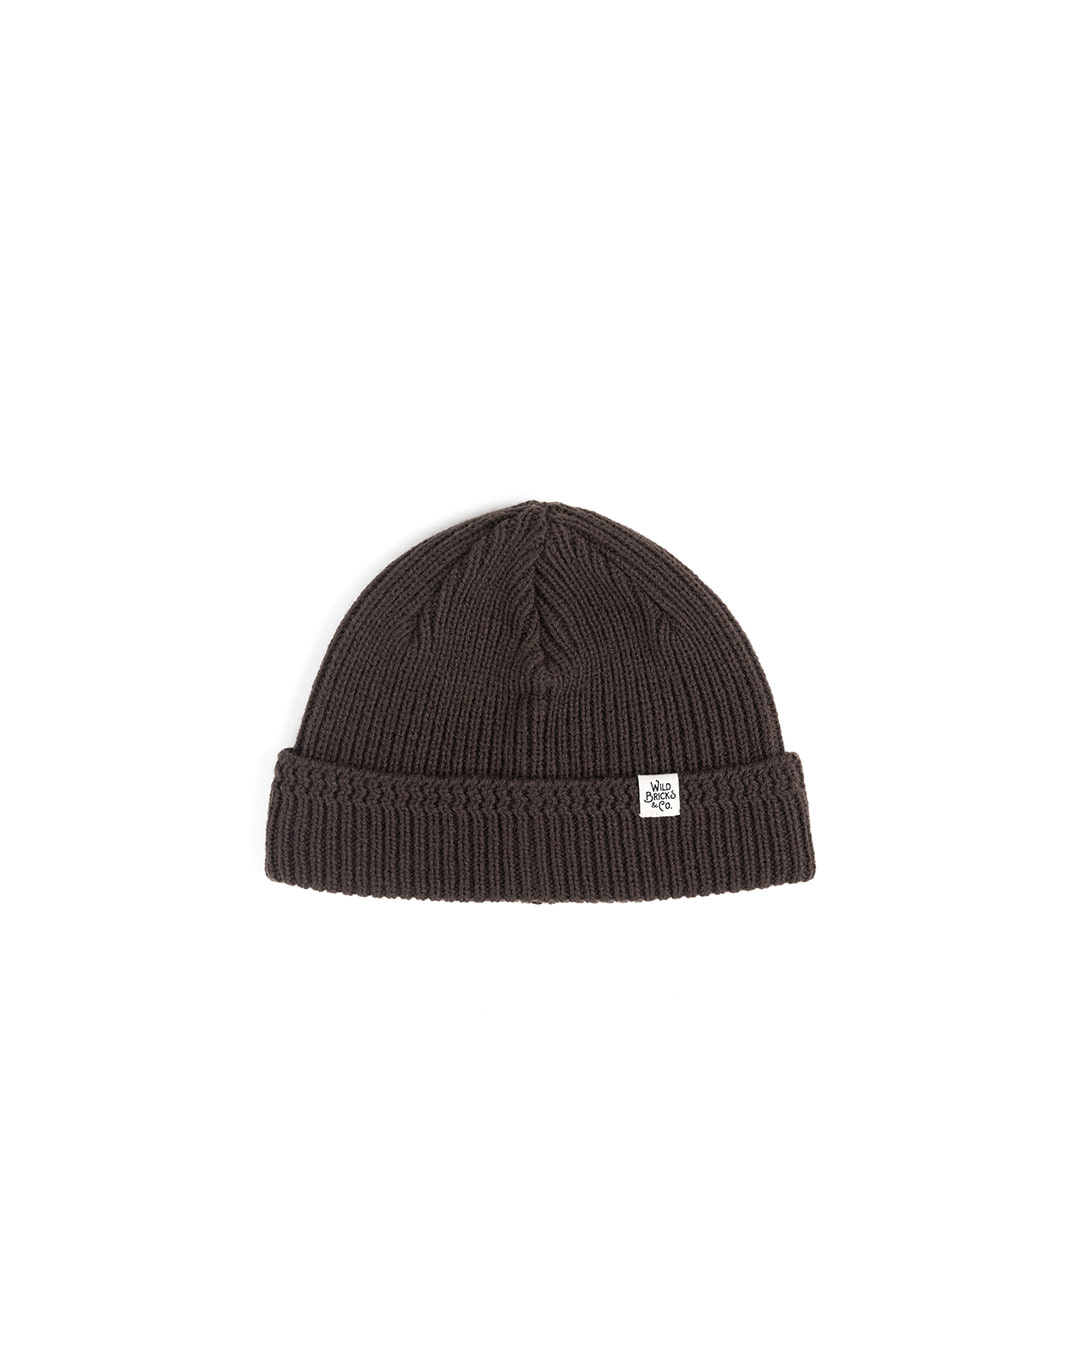 MILITARY KNIT WATCH CAP (brown)